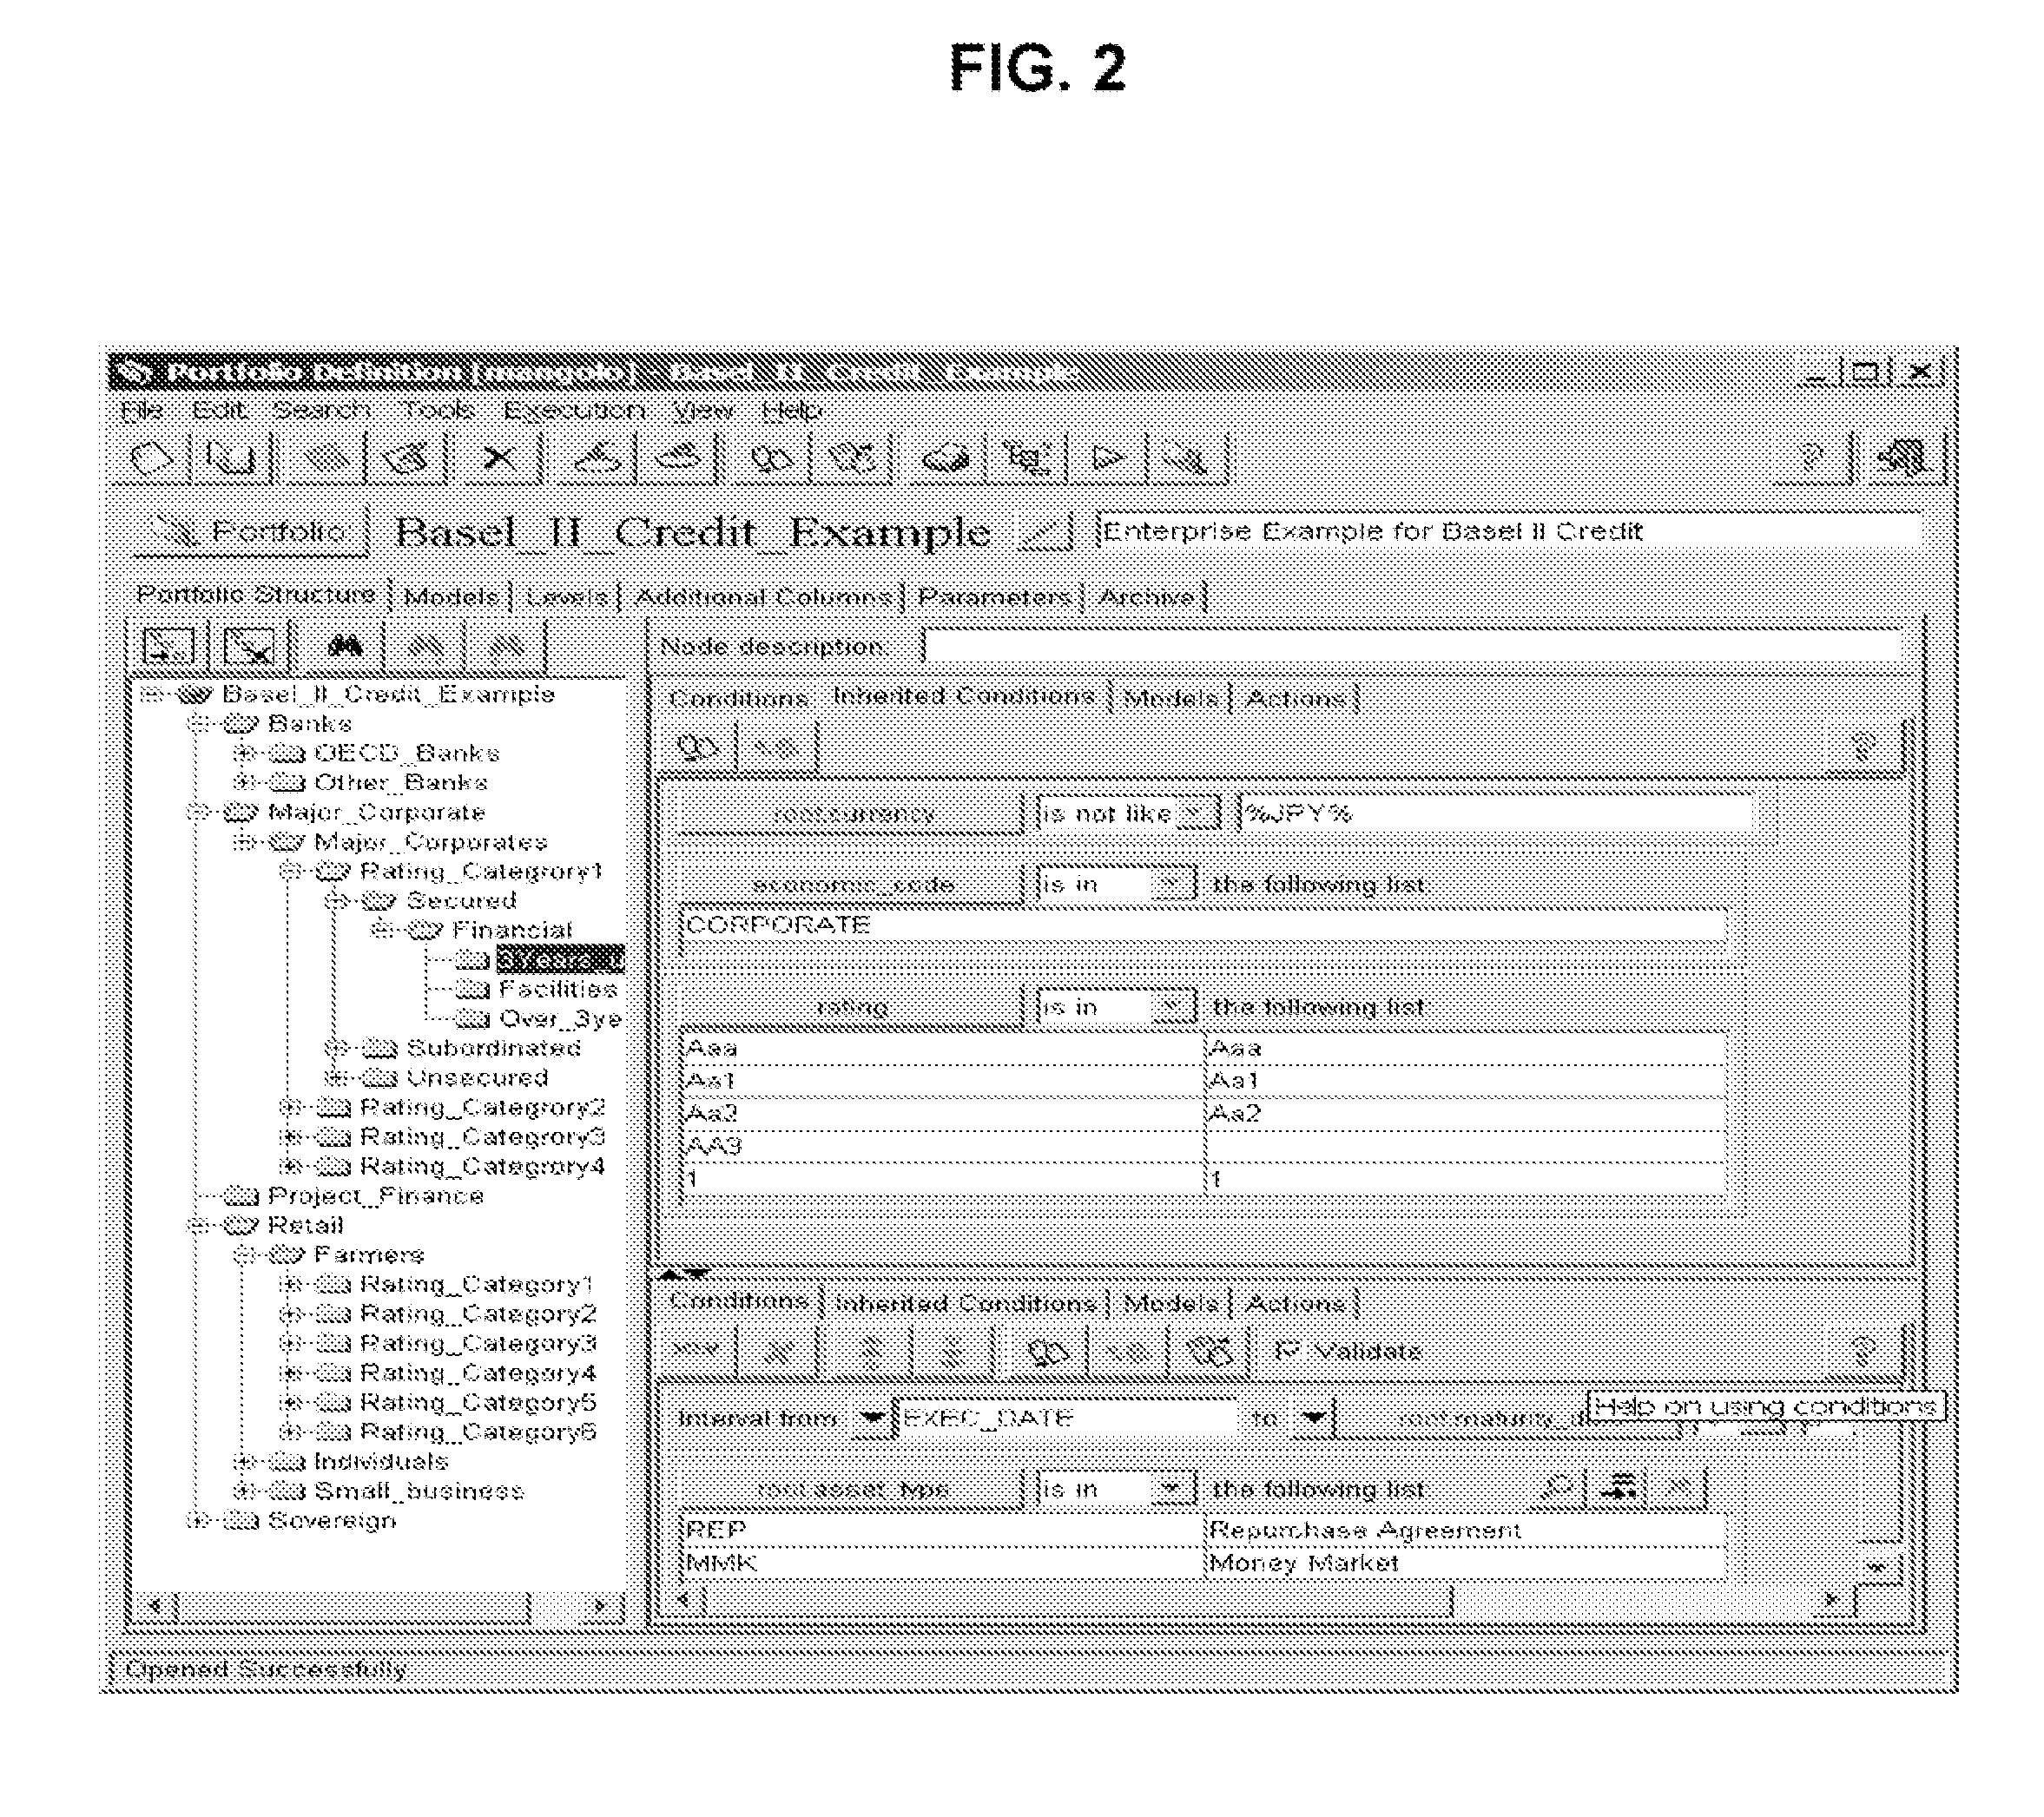 System and Method For Dynamically Utilizing and Managing Financial, Operational, and Compliance Data